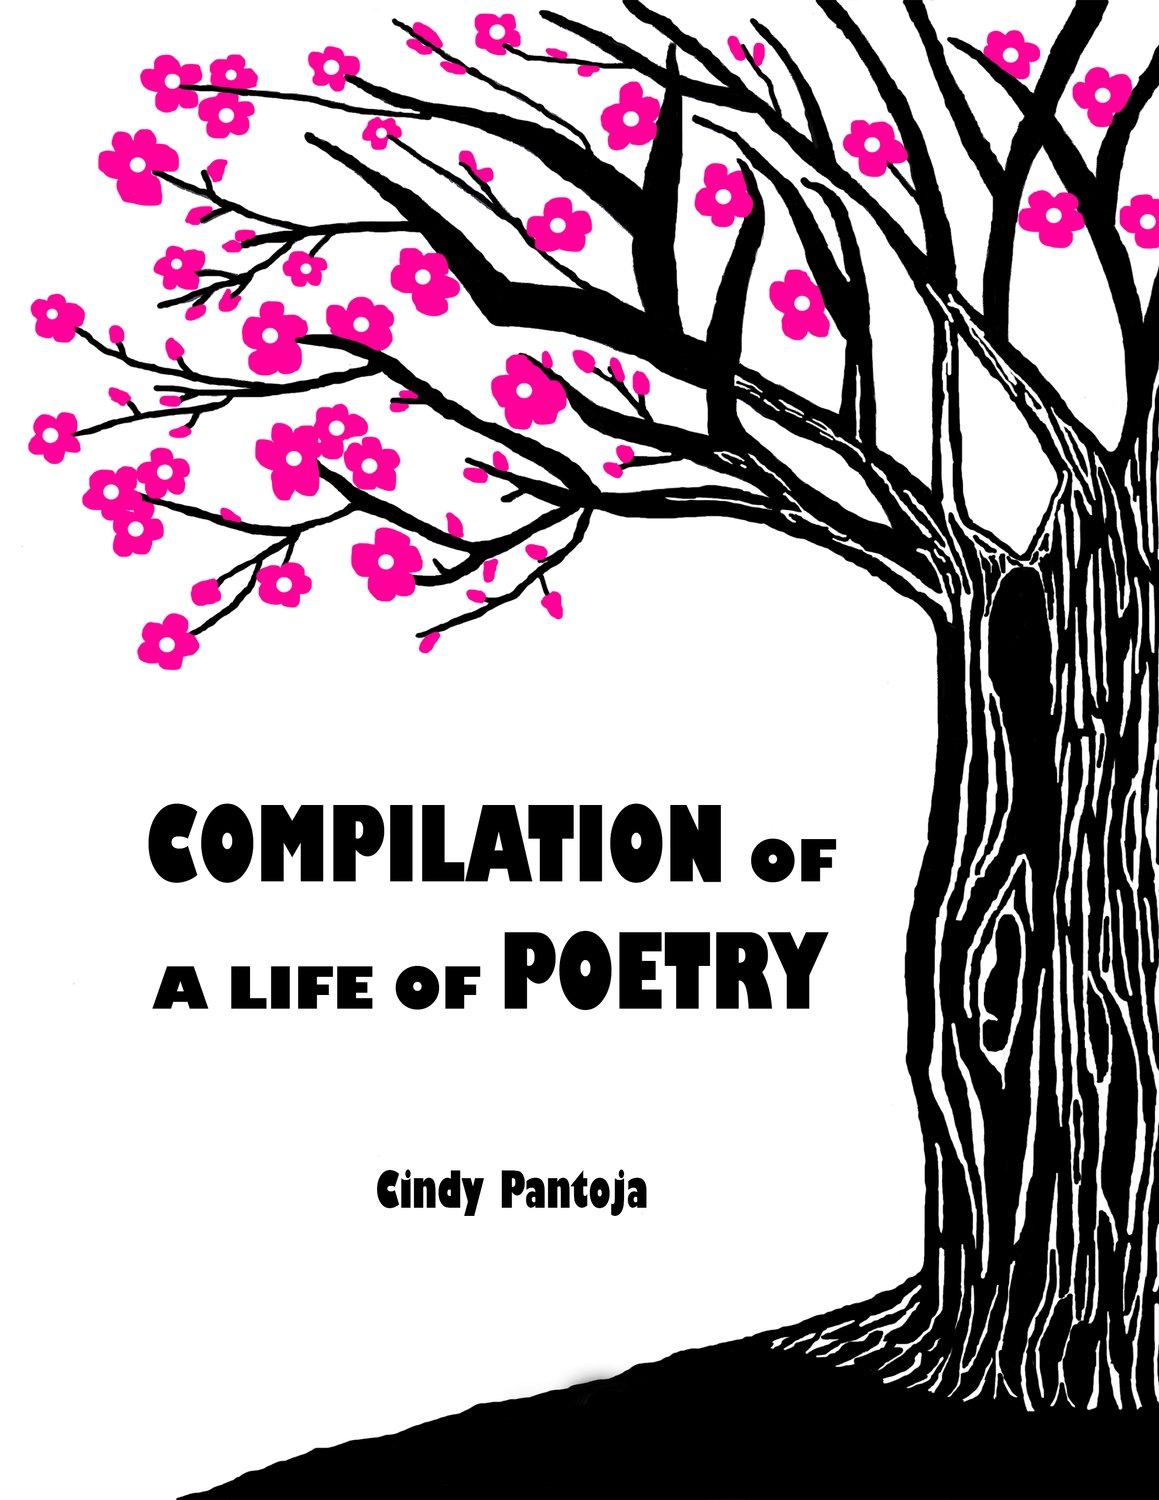 COMPILATION OF A LIFE OF POETRY